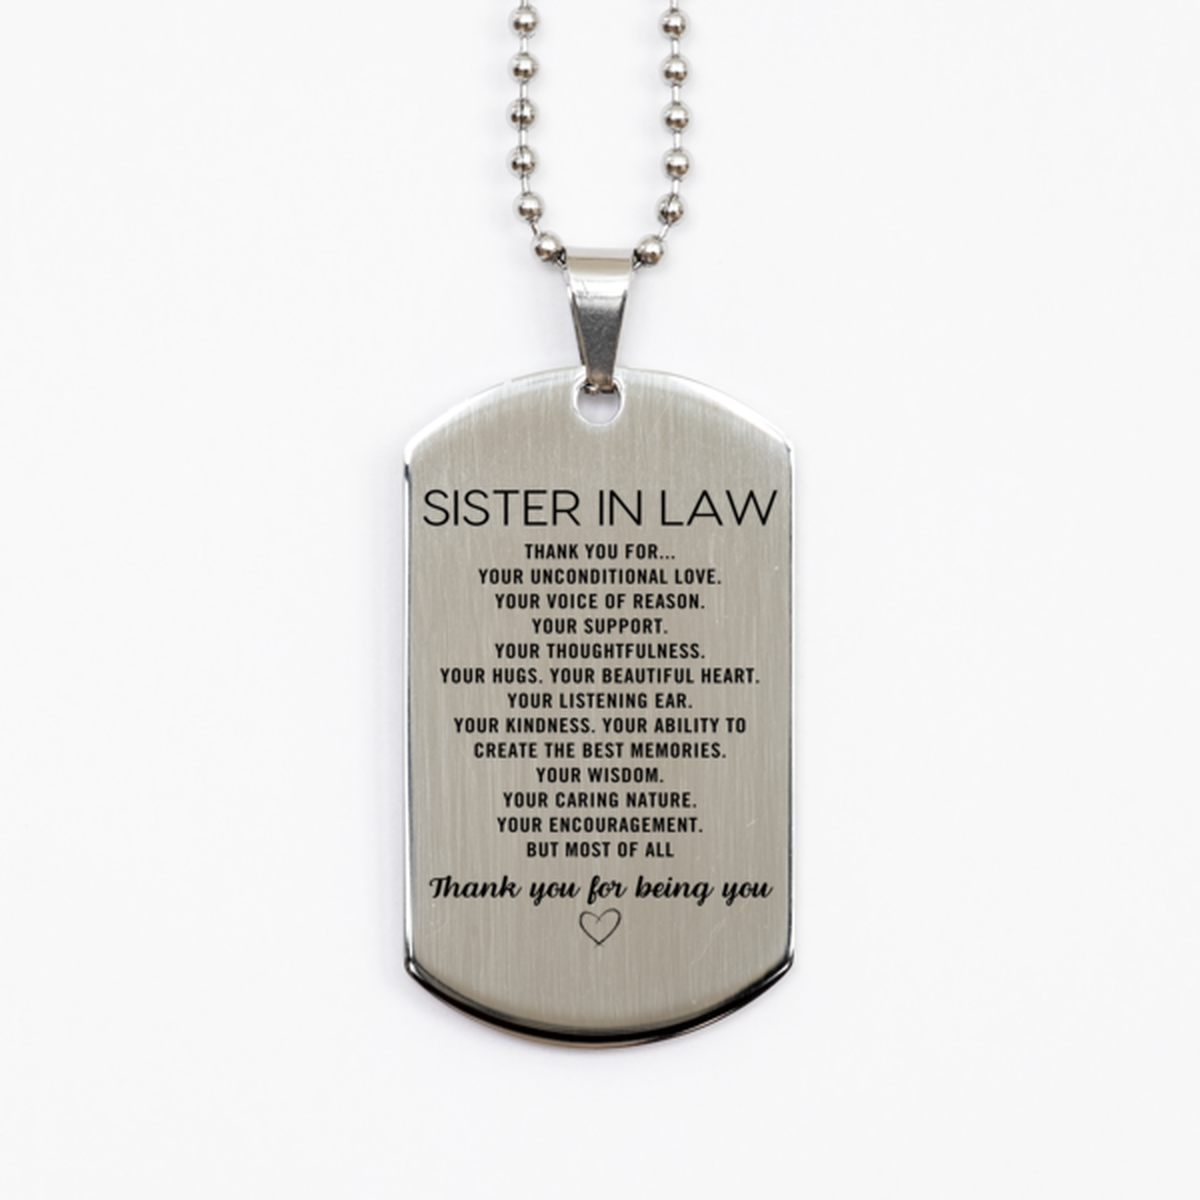 Sister In Law Silver Dog Tag Custom, Engraved Gifts For Sister In Law Christmas Graduation Birthday Gifts for Men Women Sister In Law Thank you for Your unconditional love